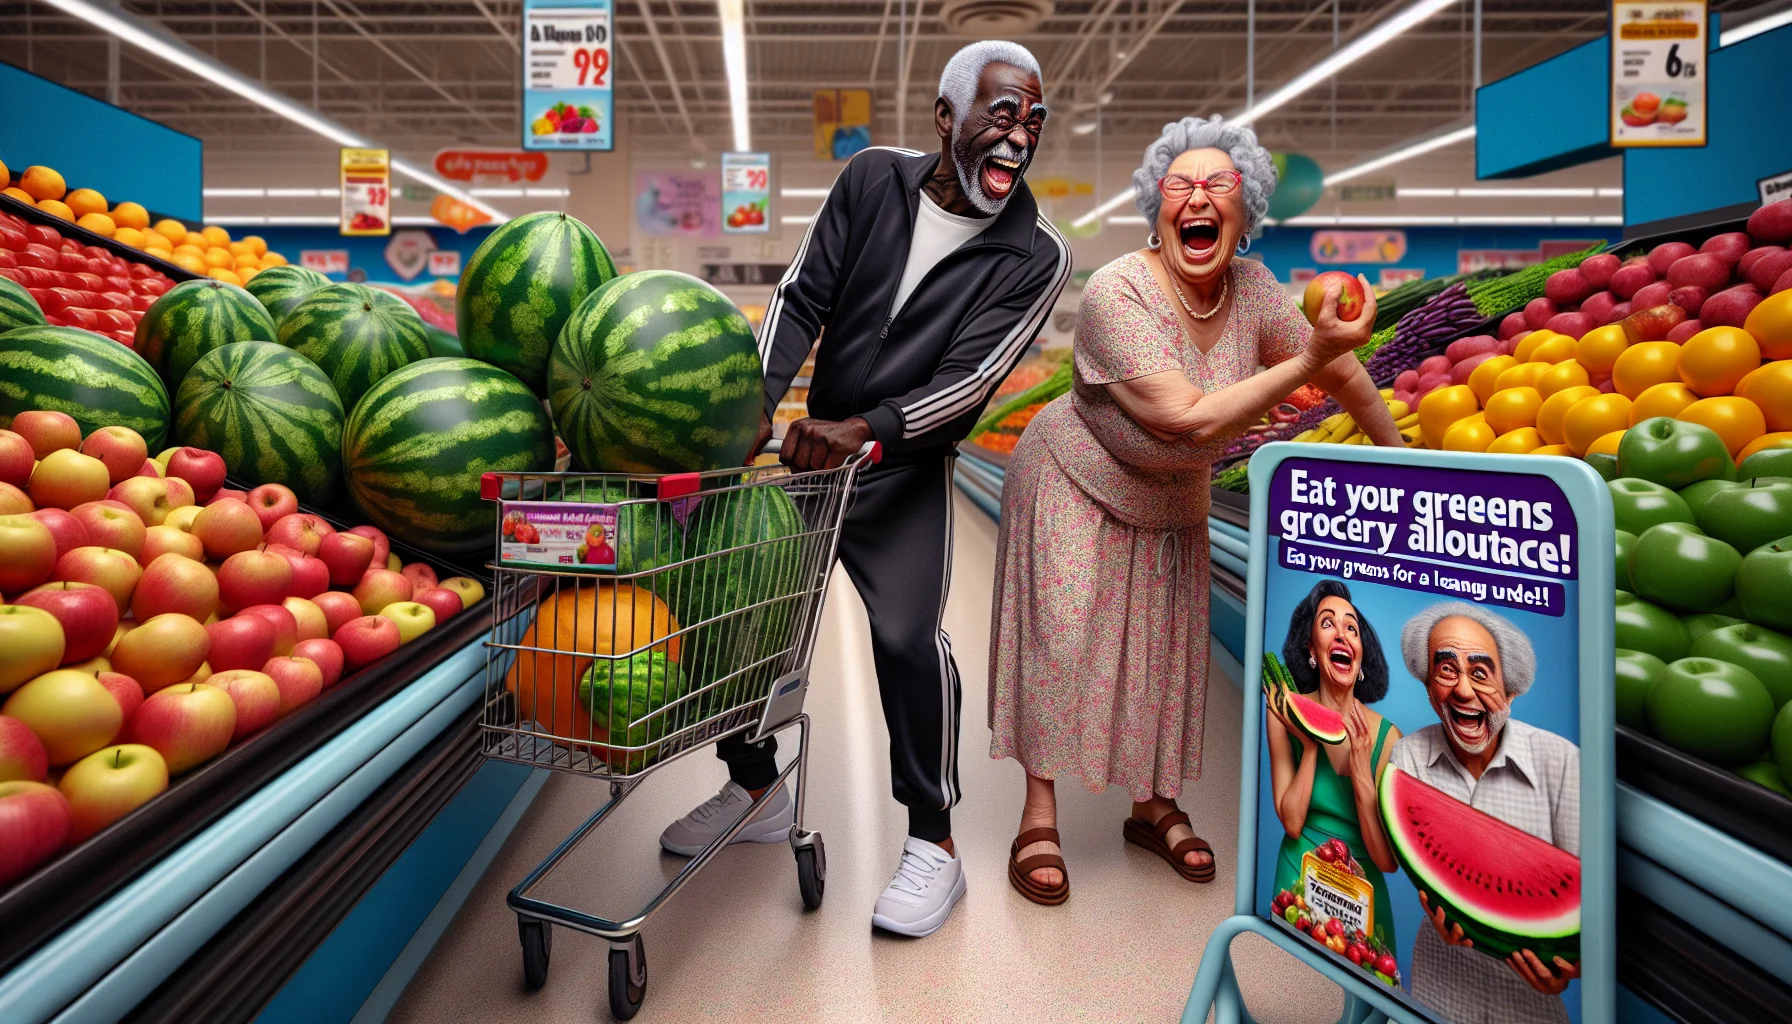 A humor-filled image portraying a Black elderly man and a Hispanic elderly woman in a supermarket. They are standing by a colorful section dedicated to fruits and vegetables, laughter in their eyes. The man, donned in a tracksuit, is placing a massive watermelon in his cart, while the woman, dressed in a floral dress, is juggling several apples. On the floor, there's a flyer showcasing 'Senior Grocery Allowance', picturing happy elderly people with a heap of vegetables and caption 'Eat your greens for a lean routine!'. The exaggerated expressions of the seniors make it an amusing scenario.